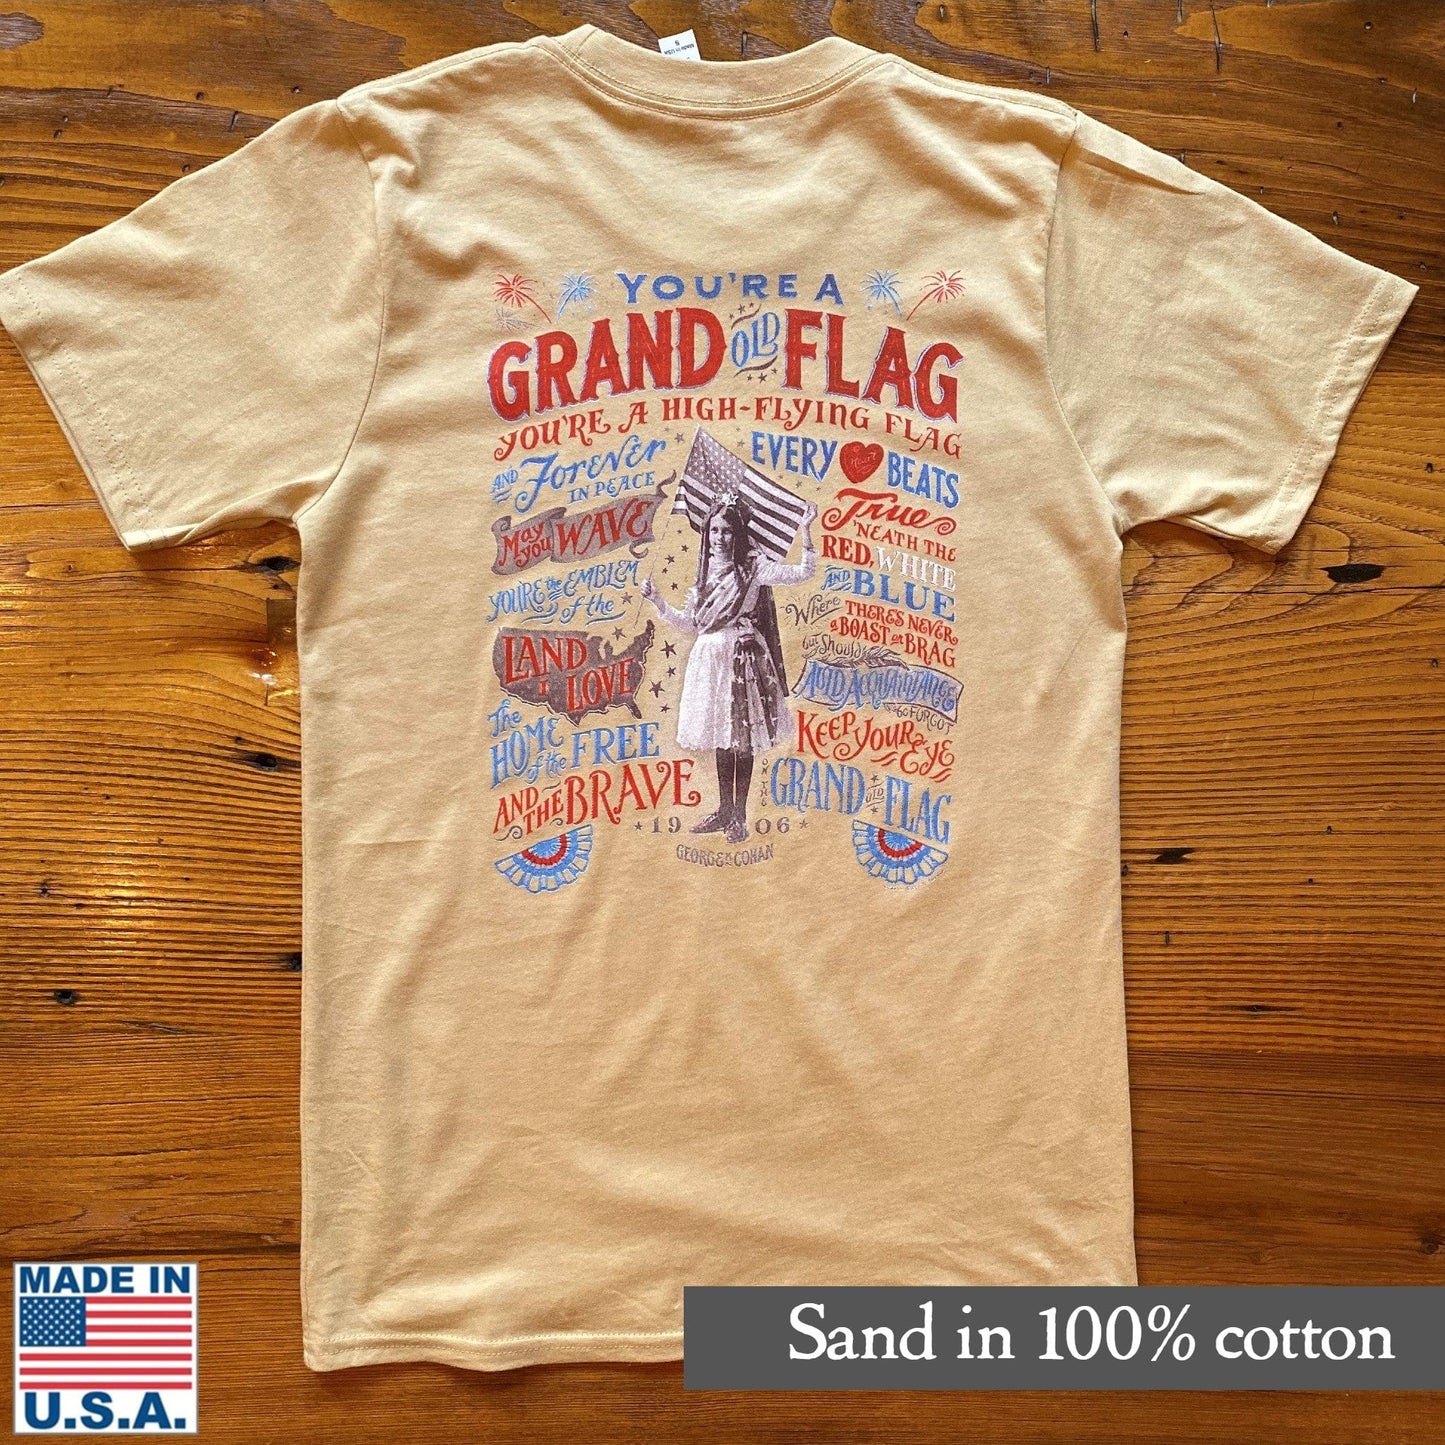 "Grand Old Flag" Shirt Sand color Back design 100% Cotton from the history list store 